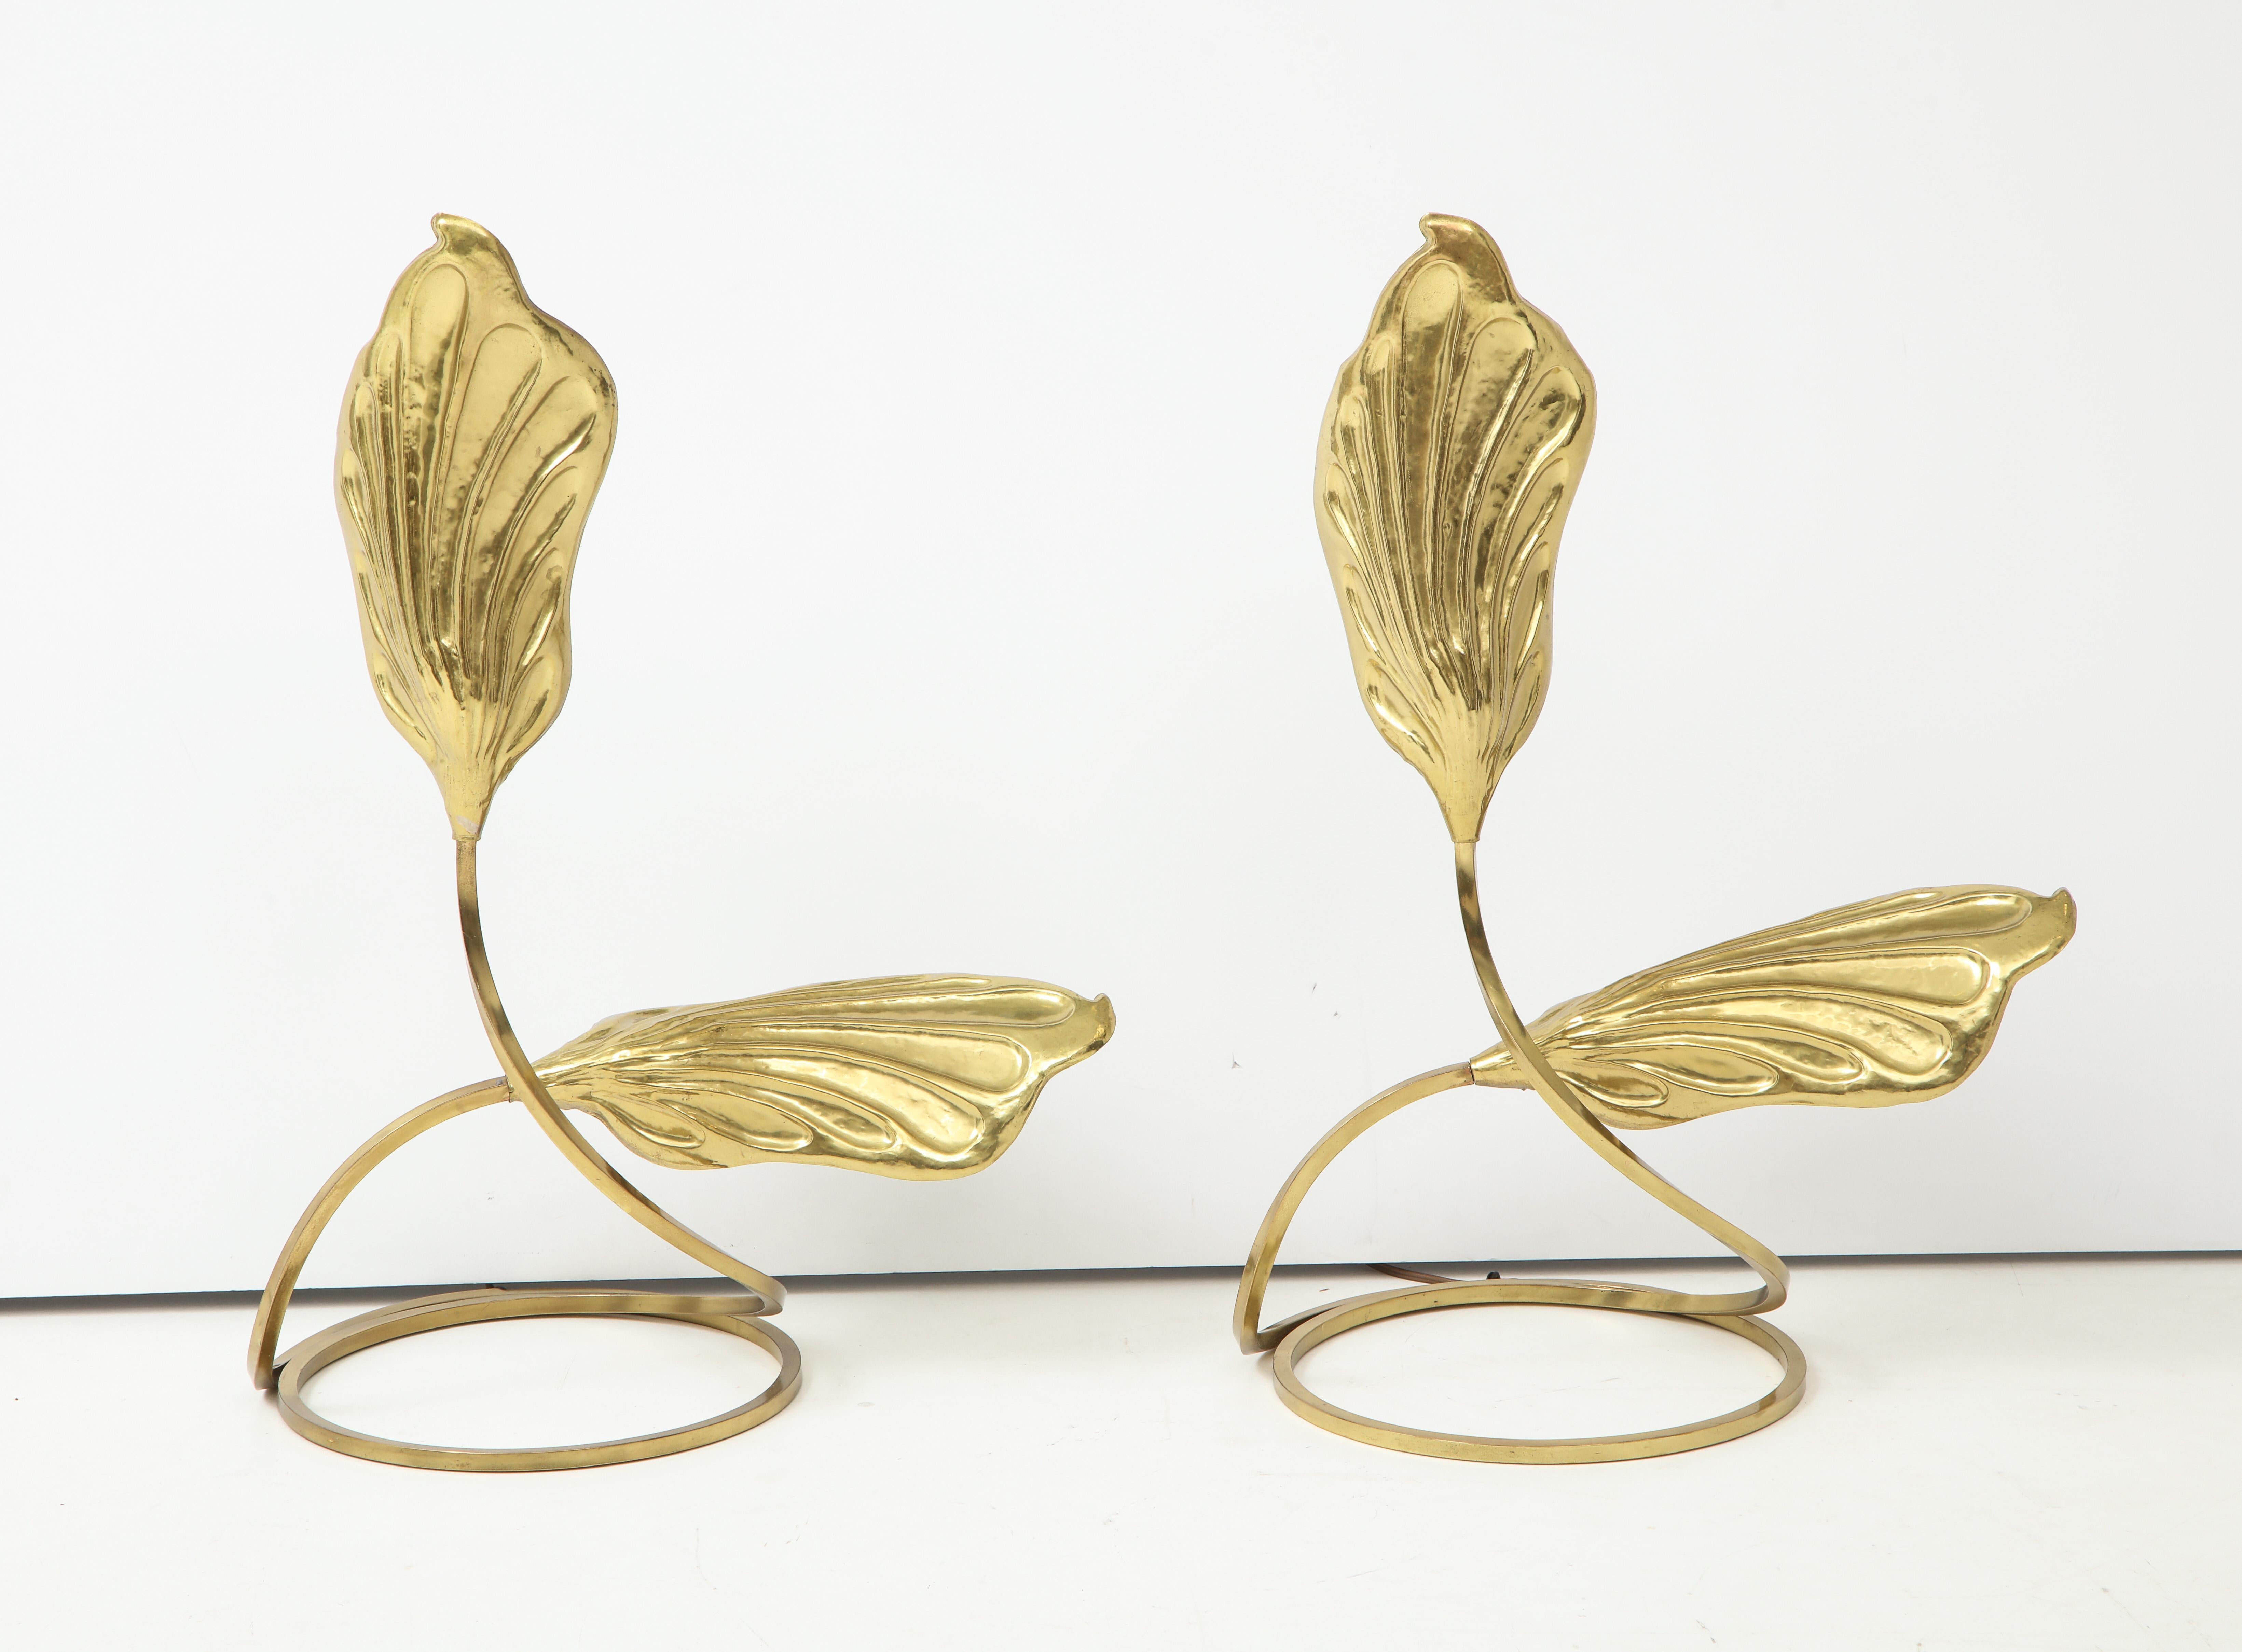 Pair of brass table lamps by Tomasso Barbi stylized leaves curve up from a circular base.